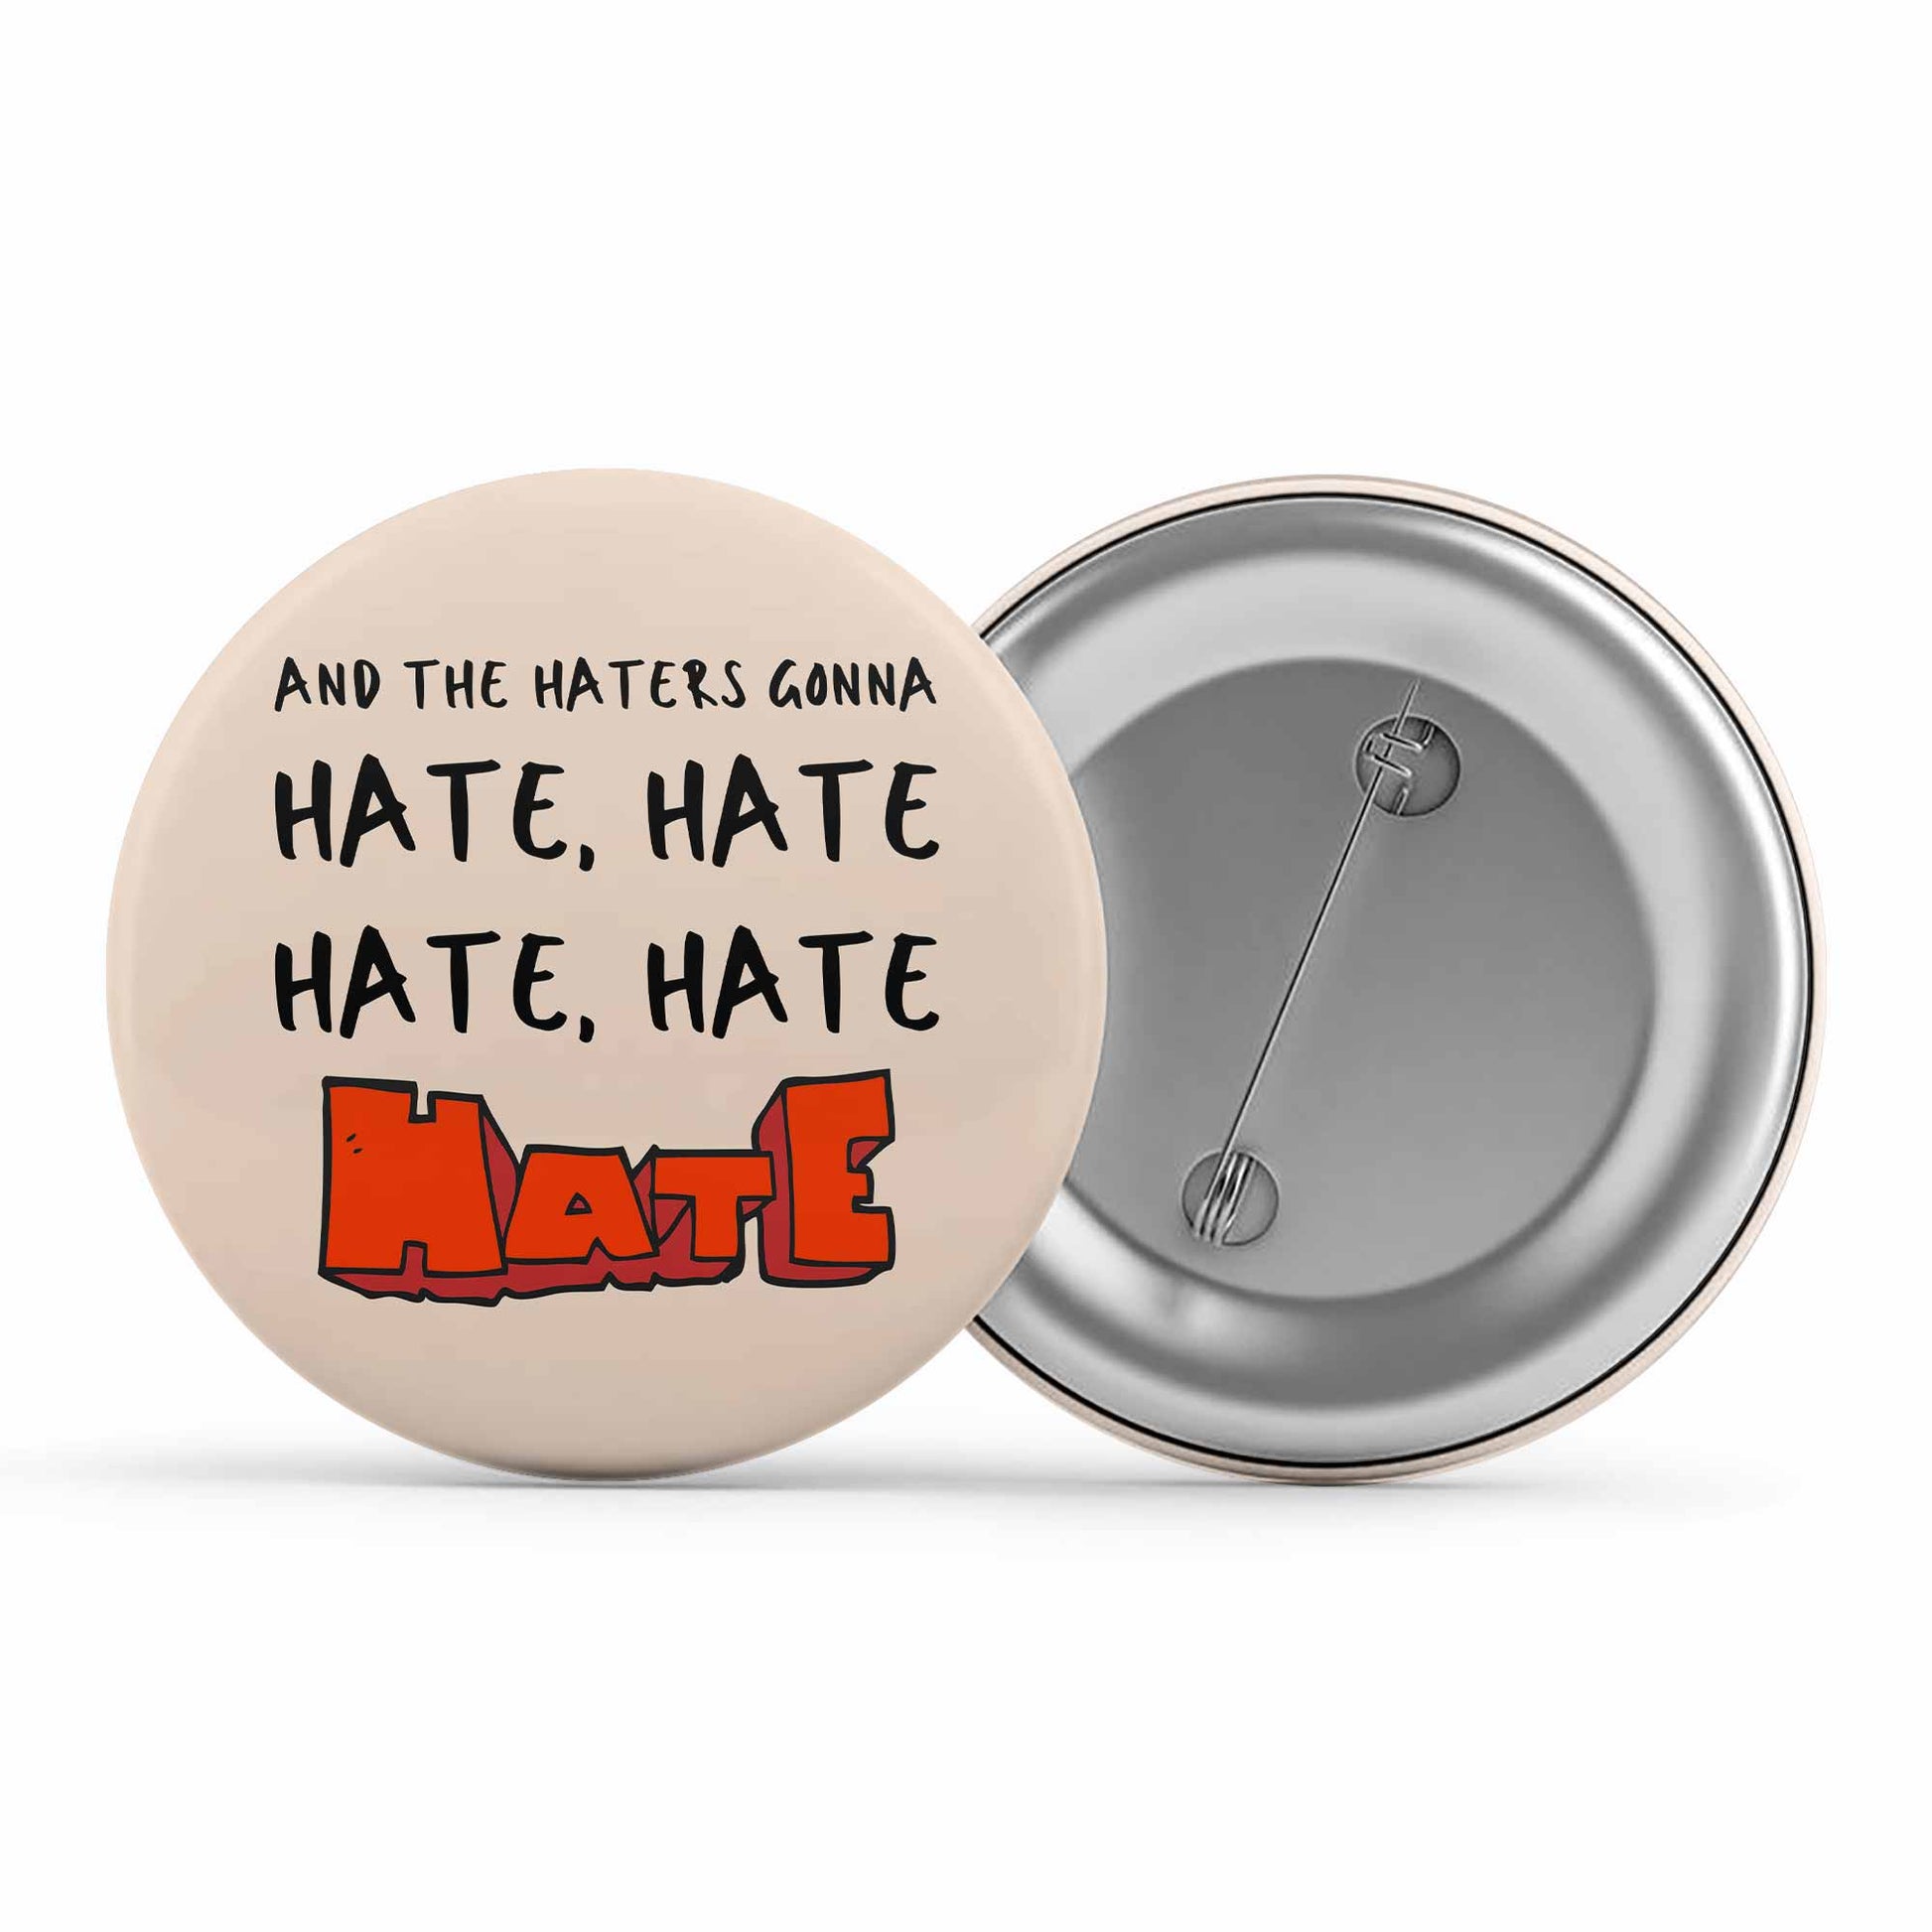 taylor swift haters gonna hate badge pin button music band buy online united states of america usa the banyan tee tbt men women girls boys unisex